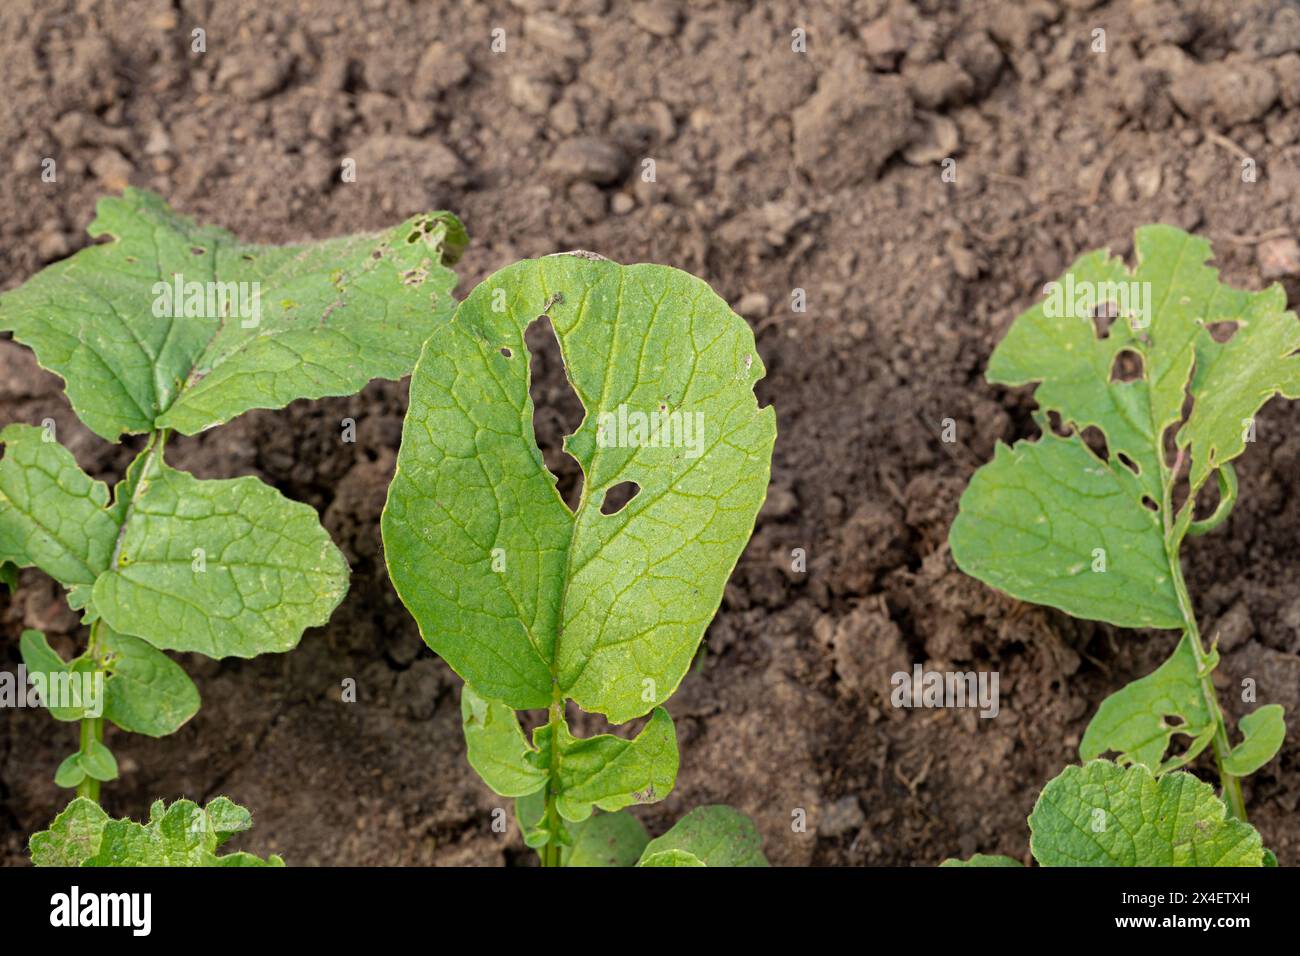 Holes in leaf of radish plant caused by insects. Garden pests, gardening pest control and organic vegetable farming concept. Stock Photo